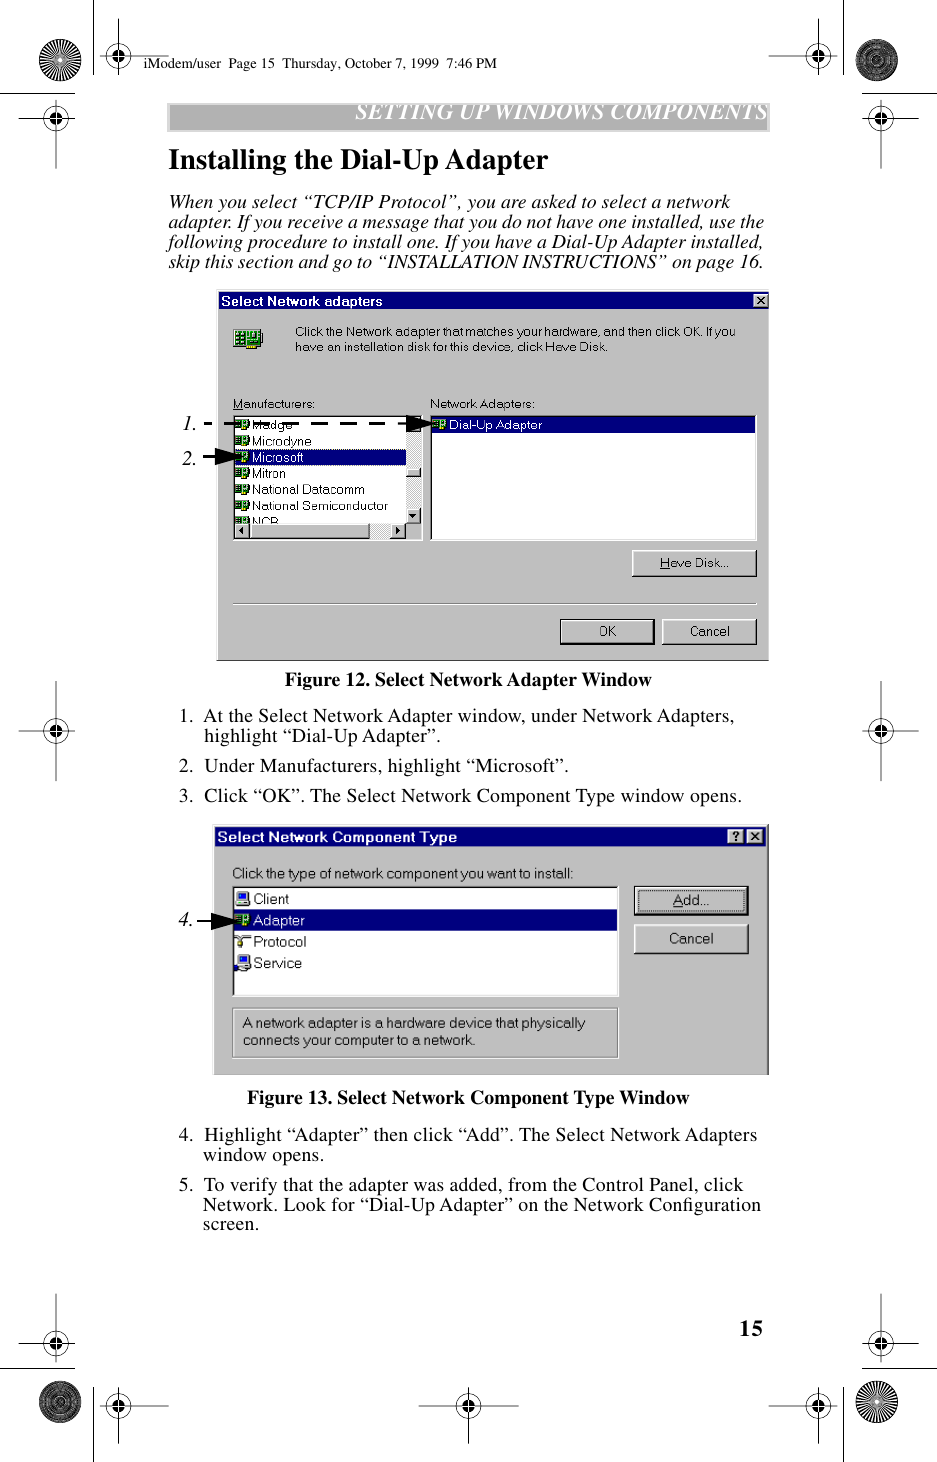  15    SETTING UP WINDOWS COMPONENTS Installing the Dial-Up Adapter When you select “TCP/IP Protocol”, you are asked to select a network adapter. If you receive a message that you do not have one installed, use the following procedure to install one. If you have a Dial-Up Adapter installed, skip this section and go to “INSTALLATION INSTRUCTIONS” on page 16.  Figure 12. Select Network Adapter Window  1.  At the Select Network Adapter window, under Network Adapters, highlight “Dial-Up Adapter”.  2.  Under Manufacturers, highlight “Microsoft”.  3.  Click “OK”. The Select Network Component Type window opens.Figure 13. Select Network Component Type Window  4.  Highlight “Adapter” then click “Add”. The Select Network Adapters window opens.  5.  To verify that the adapter was added, from the Control Panel, click Network. Look for “Dial-Up Adapter” on the Network Conﬁguration screen.1.2.4.iModem/user  Page 15  Thursday, October 7, 1999  7:46 PM